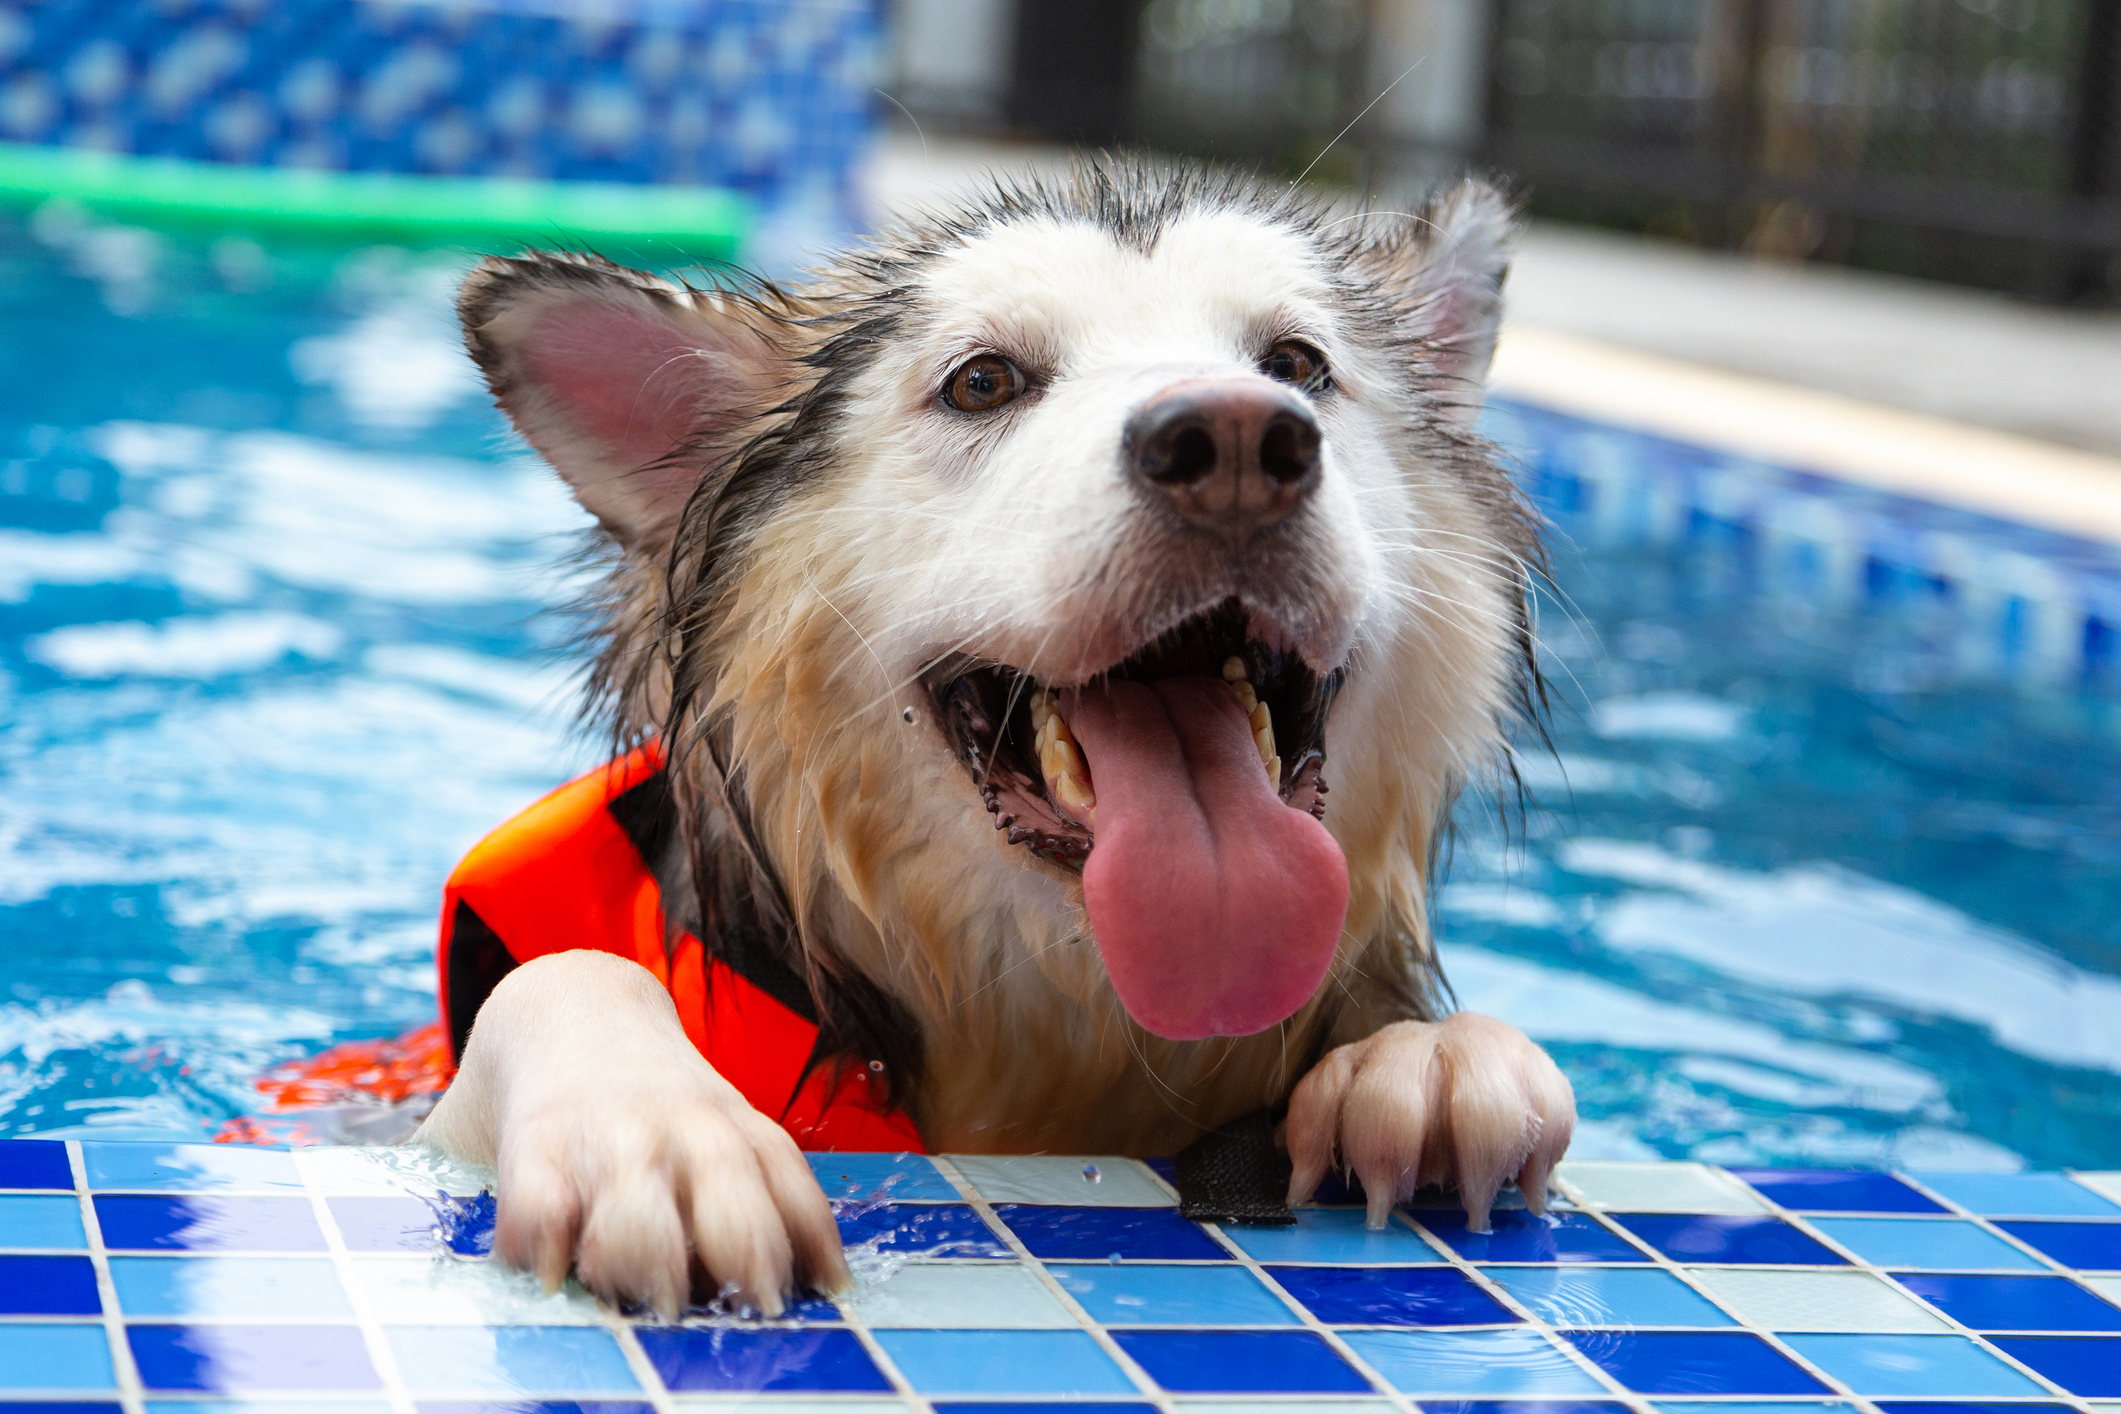 A happy Alaskan Malamute dog swimming in a pool with a life vest